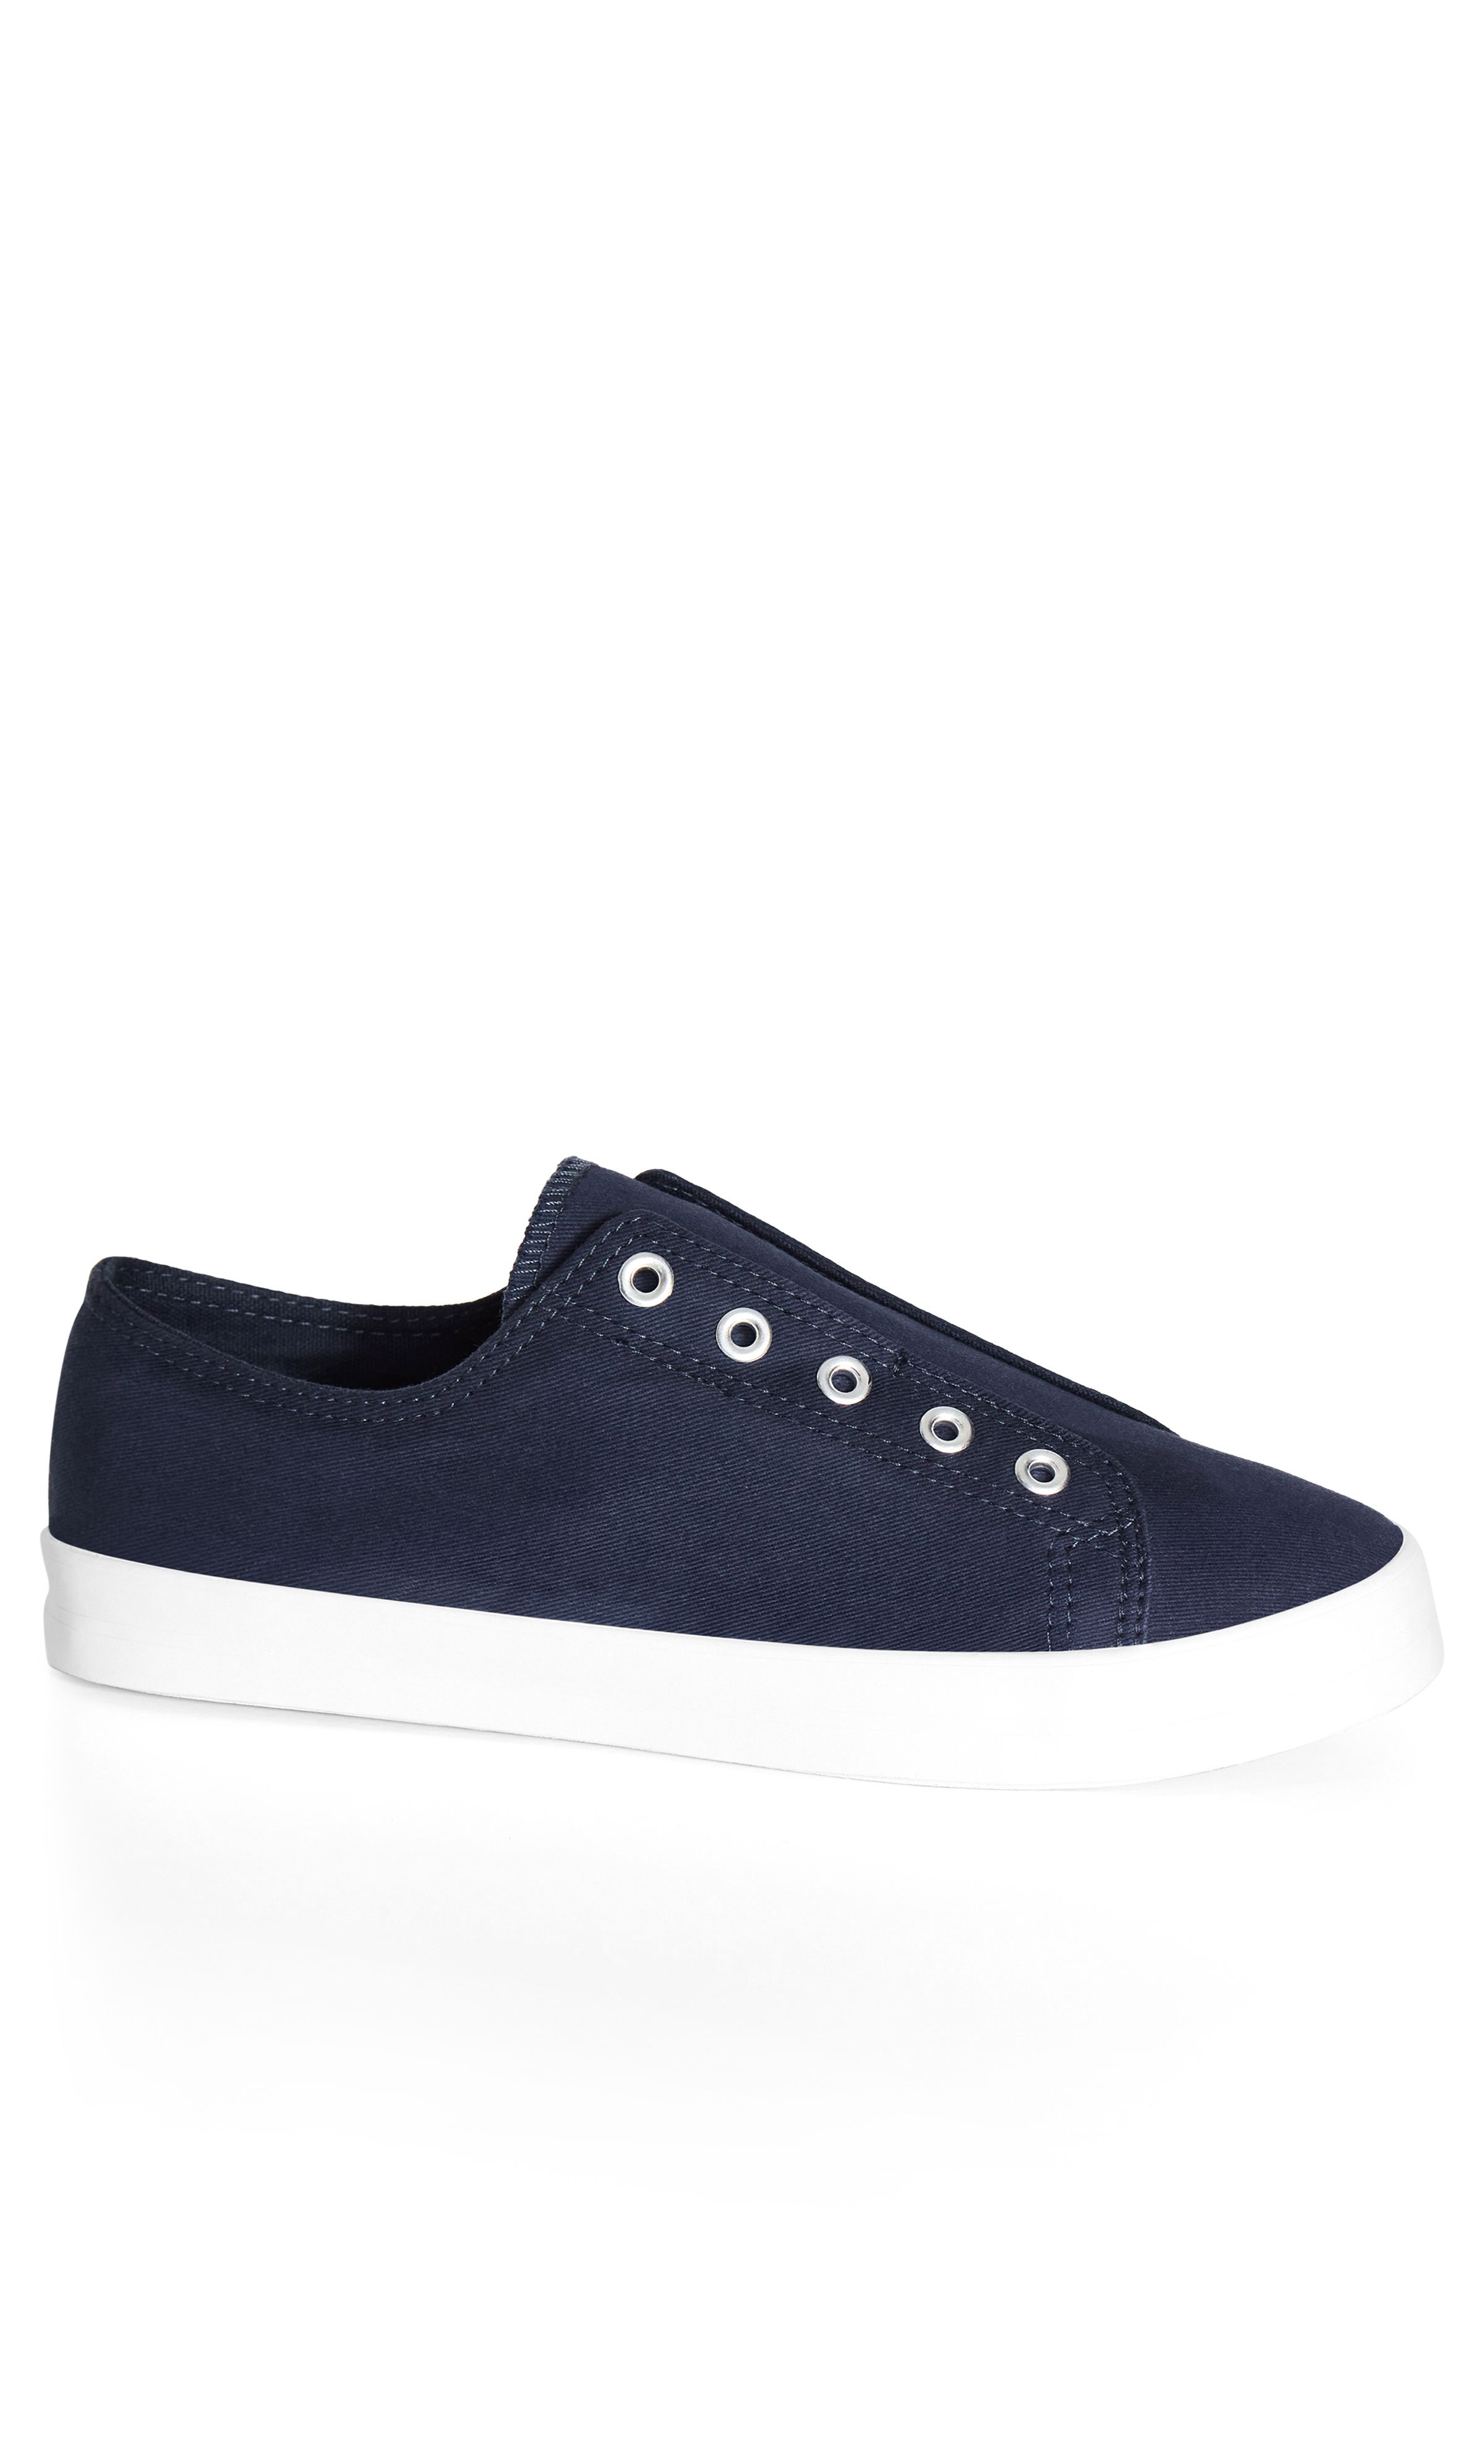 Your classic canvas trainer with a twist — it's laceless! The Laceless Trainer is bound to be on high rotation in your wardrobe this season thanks to a practical slip on style and comfortable rubber sole. Whether you're headed to the shops or a quick coffee catch up, this pair has you covered. Key Features Include: - Round toe - Laceless front - Canvas fabric upper - Slip on style - Thick sole Keep it casual in a slogan tee and long shorts, finishing with your favourite tote.